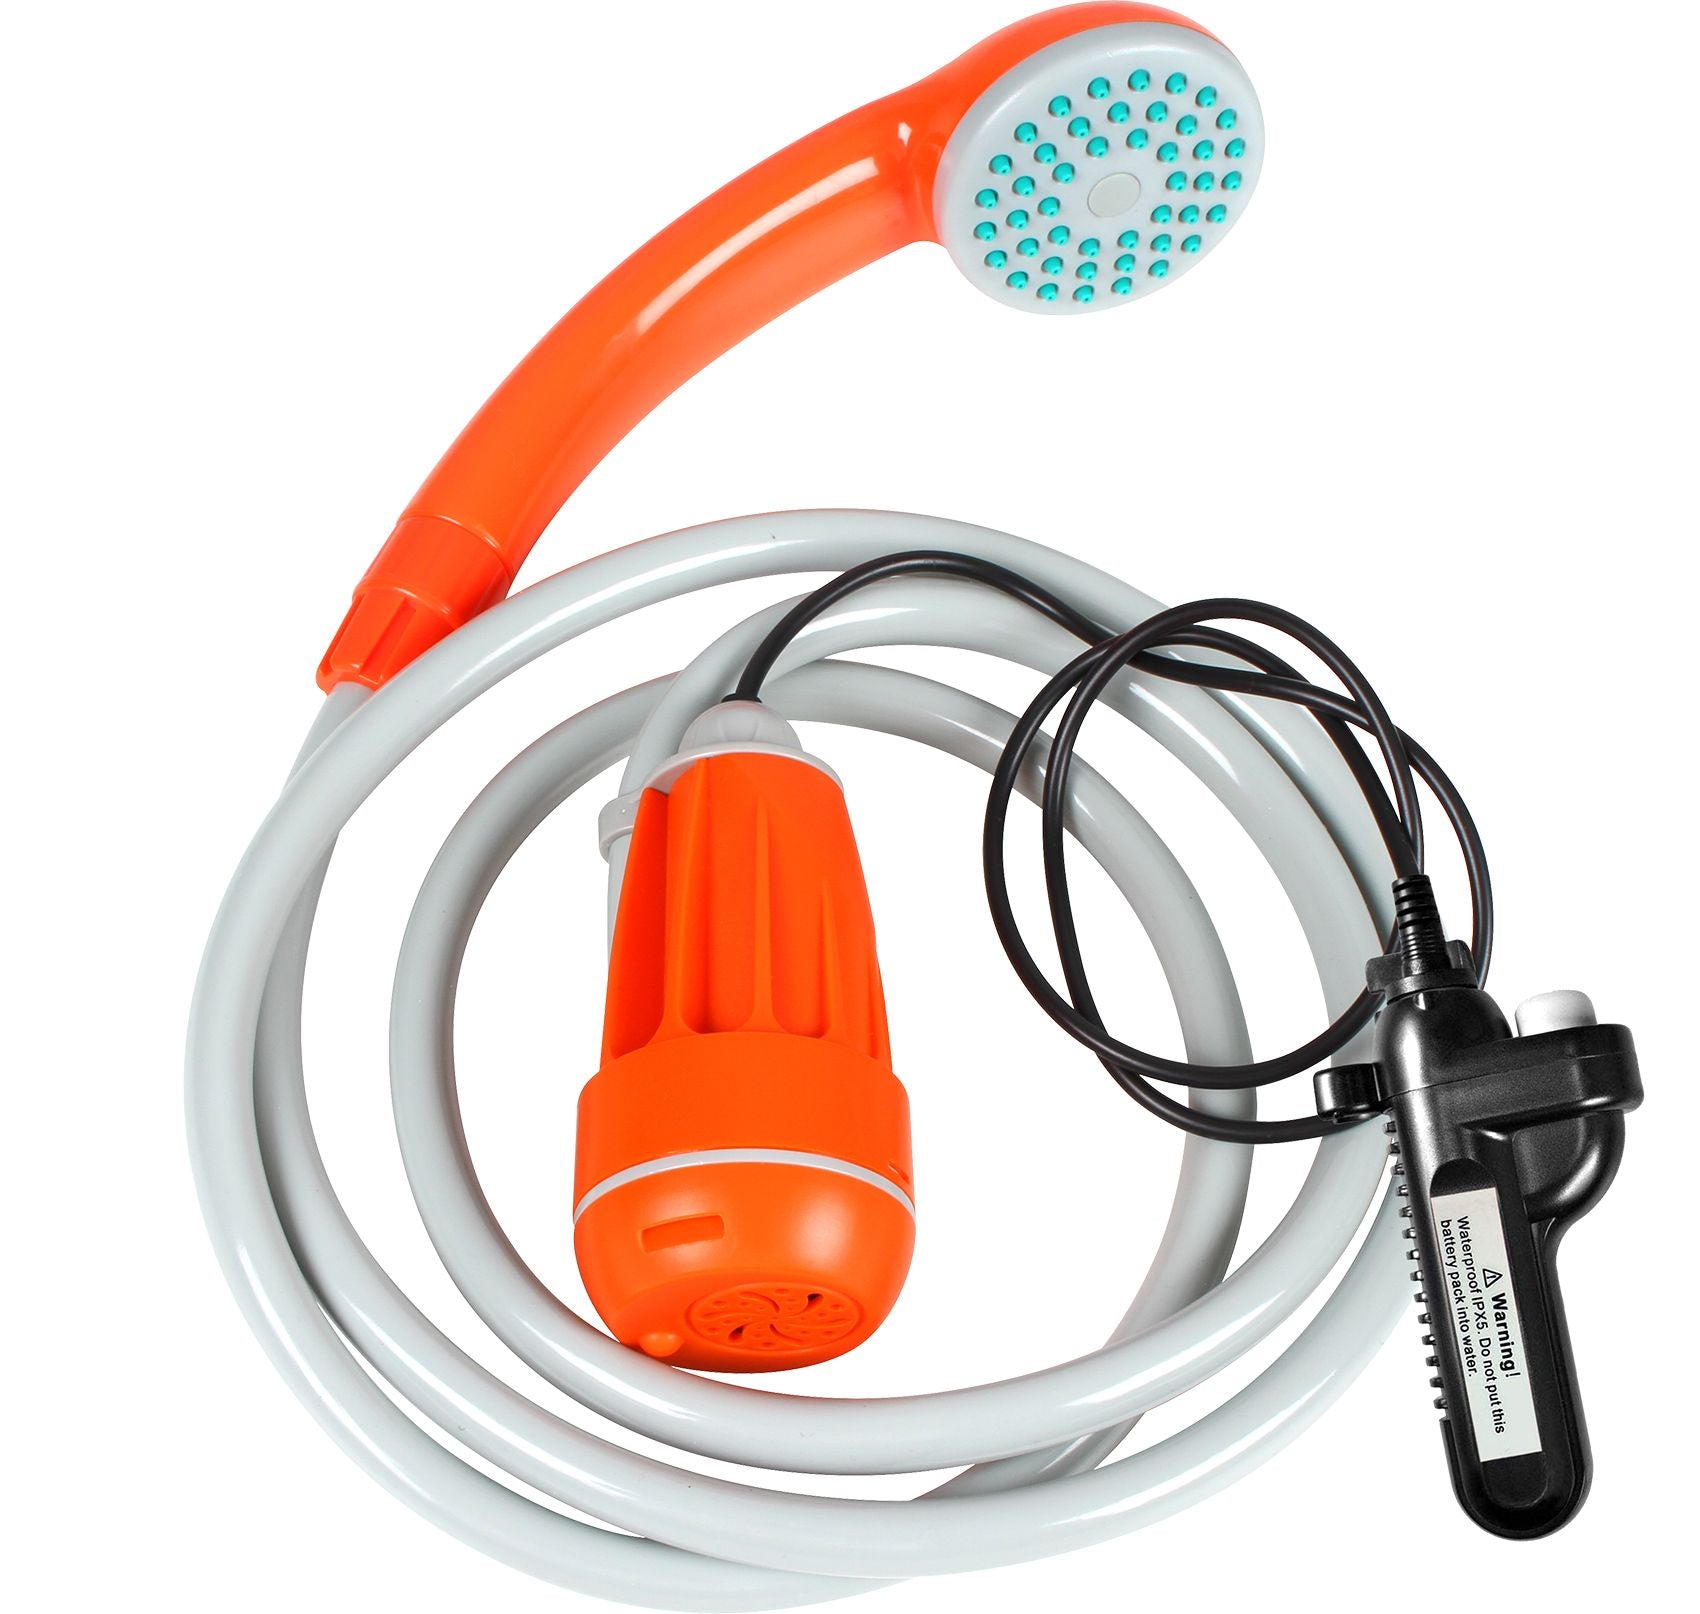 12V CAMP SHOWER RECHARGEABLE